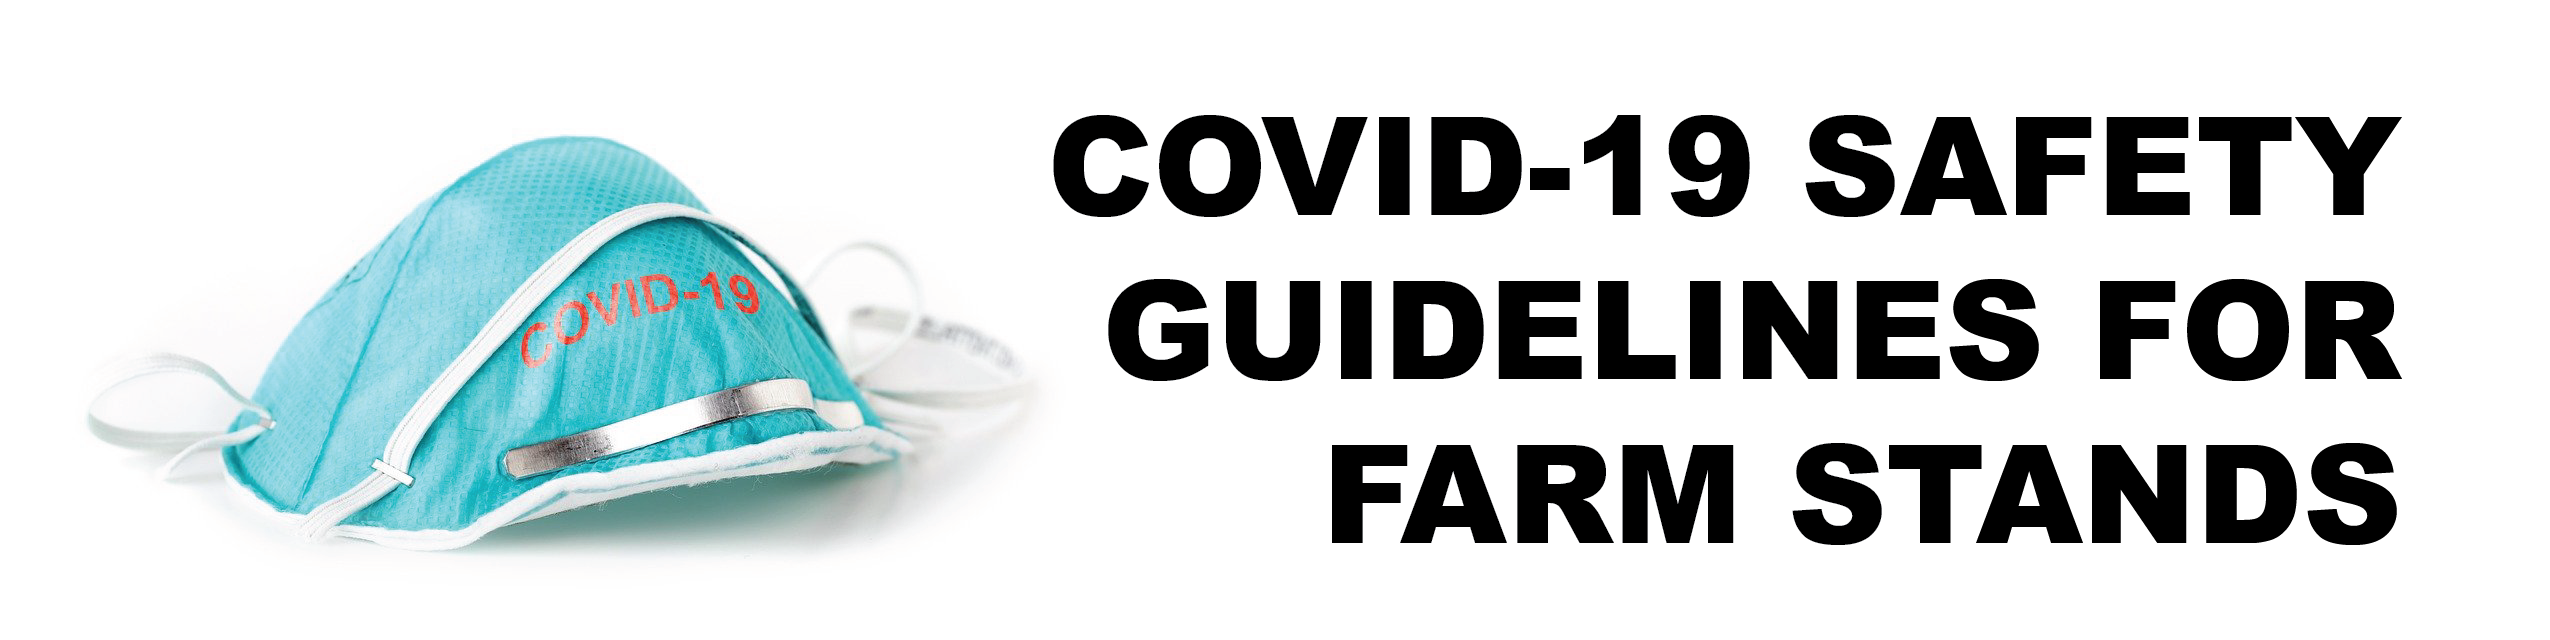 COVID-19 SAFETY GUIDELINES FOR FARM STANDS